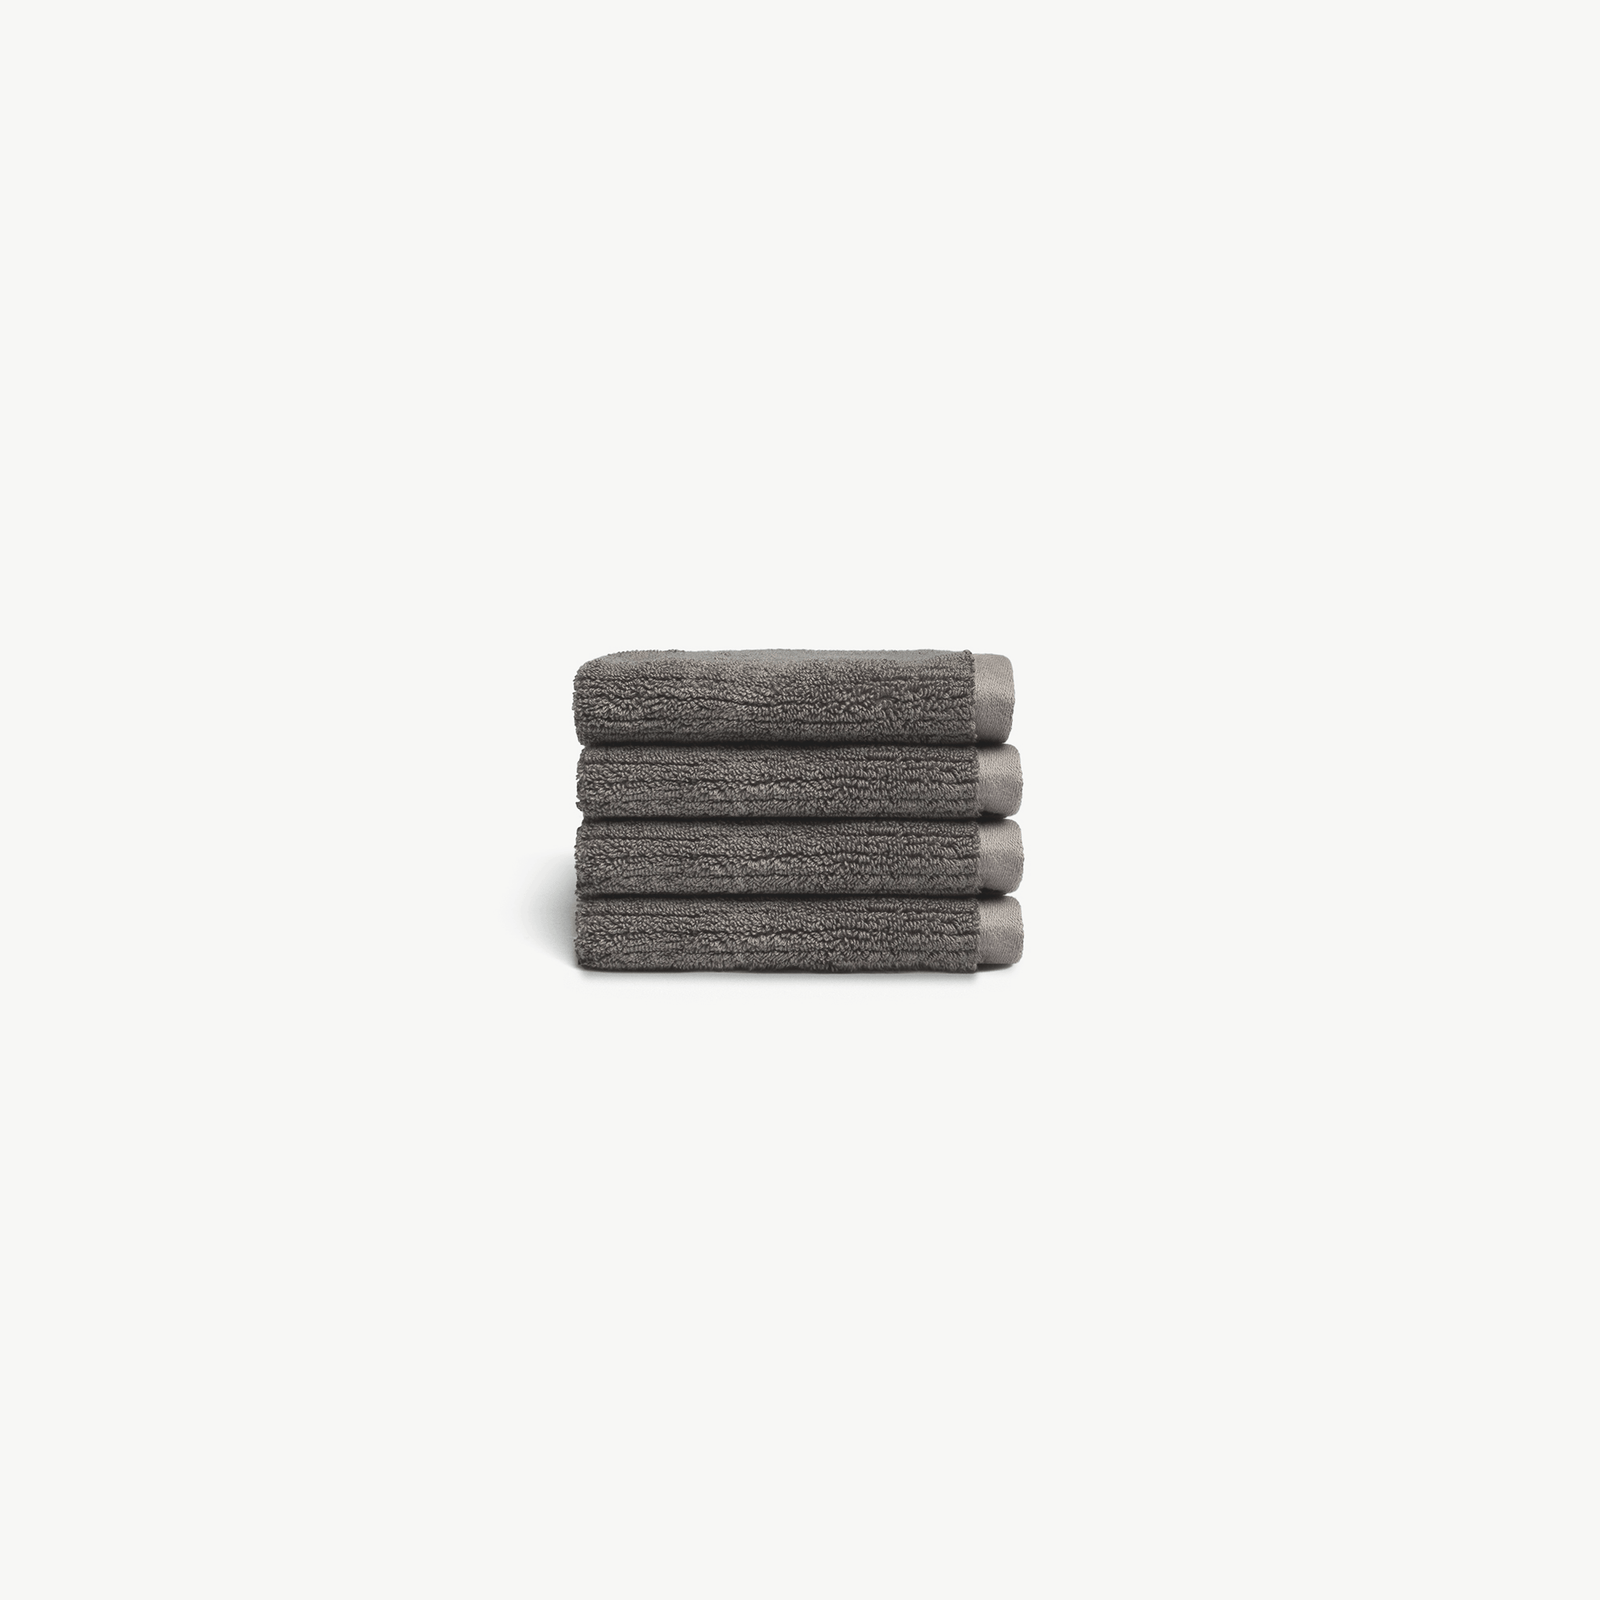 Ribbed Terry Wash Cloths in the color Charcoal. Photo of product taken with white background. 